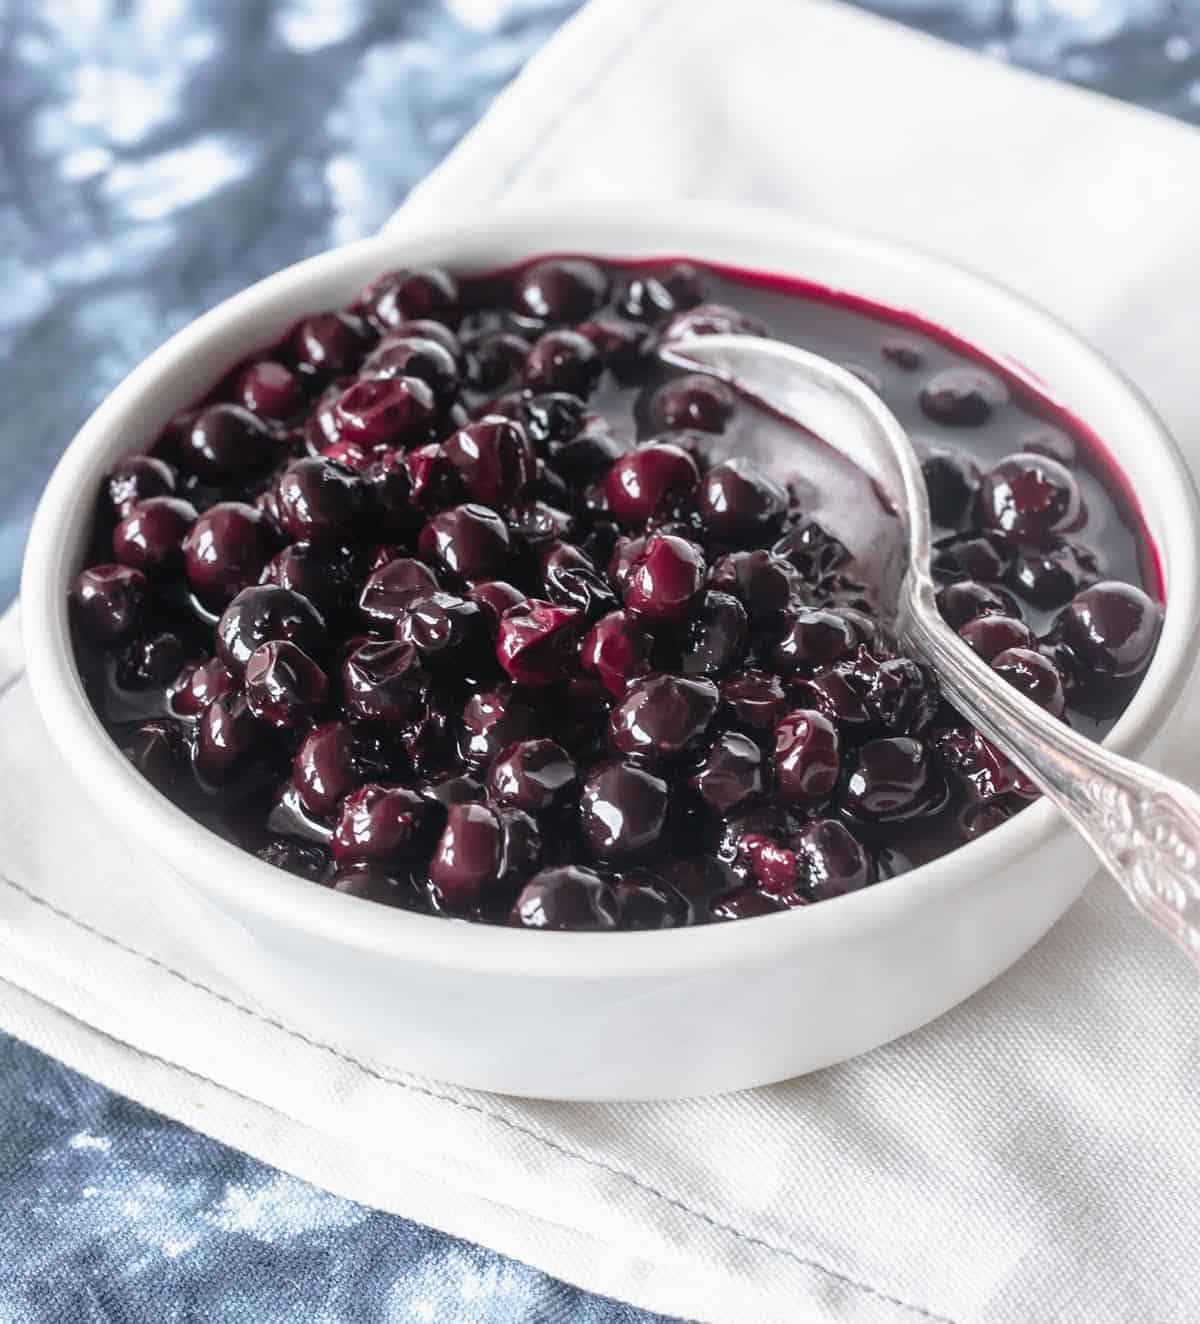 Whole white bowl with blueberry compote and silver spoon on blue white cloth.